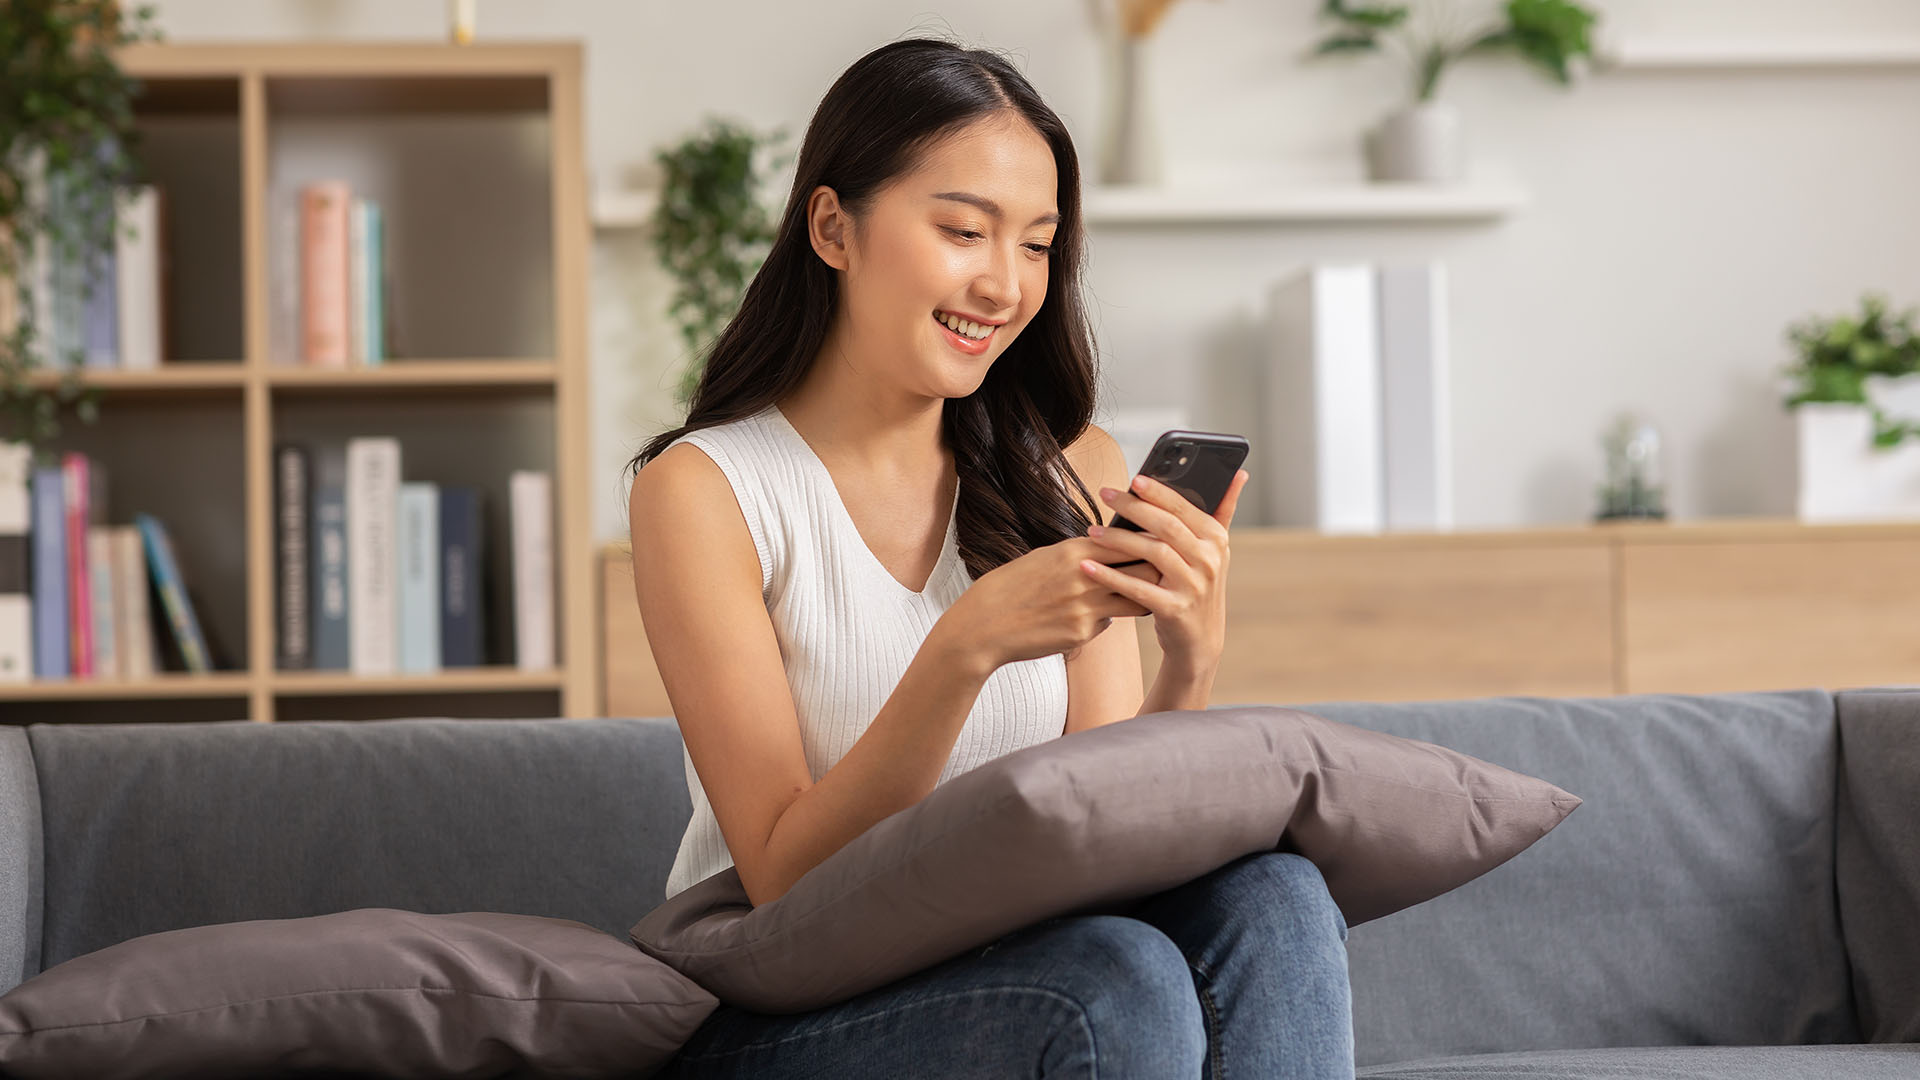 Brunette Asian woman in white shirt and jeans, sitting down at her living room, smiling while looking at her phone.